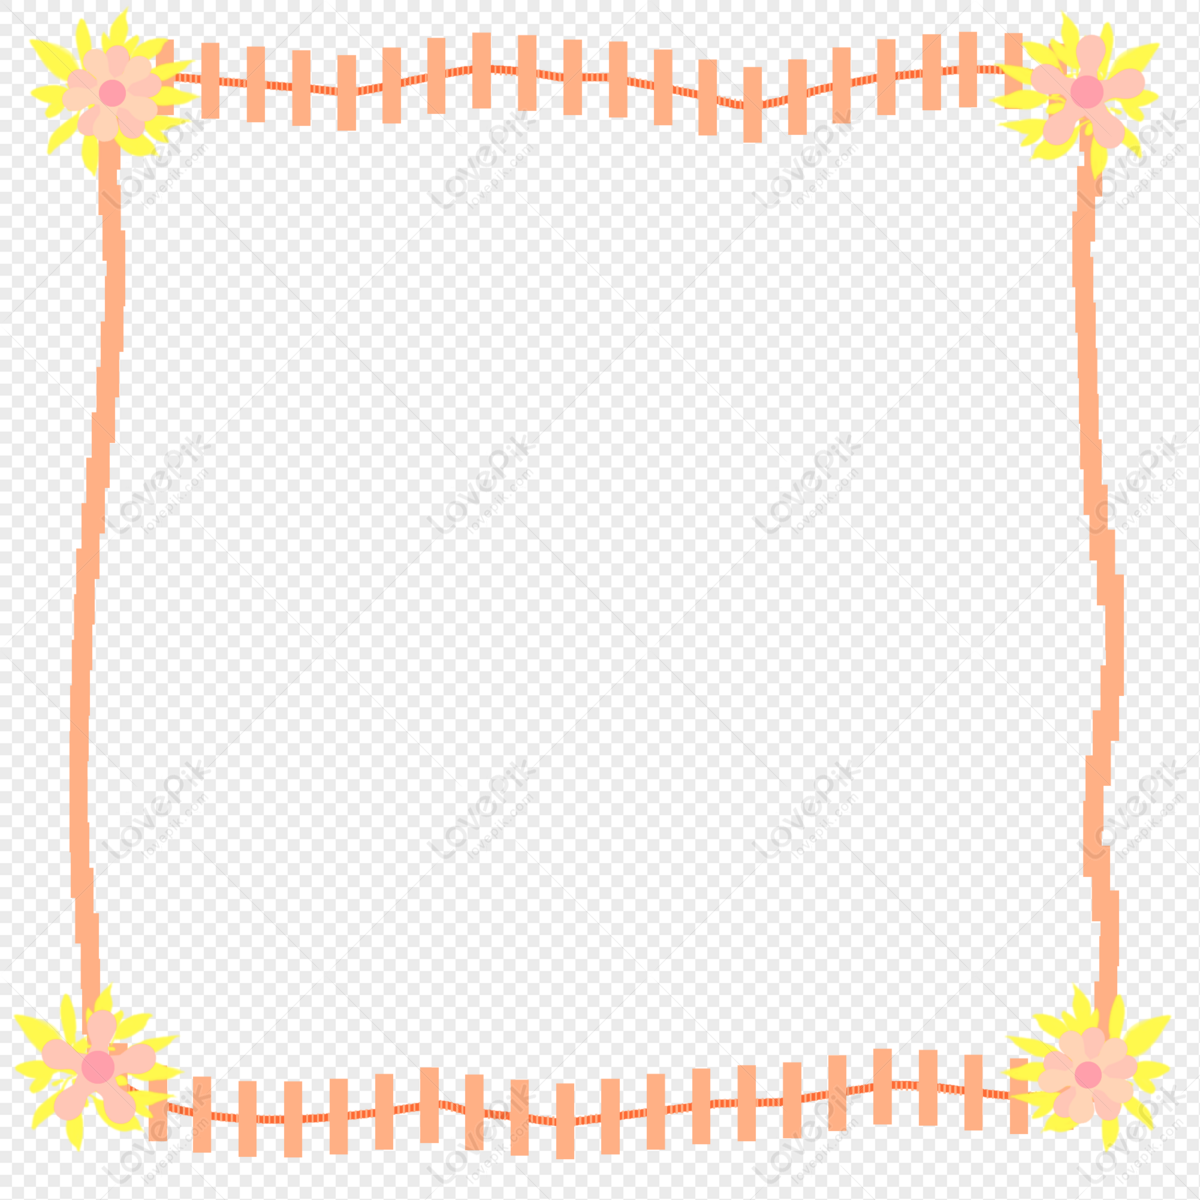 Yellow Hand Painted Flower Border Free PNG And Clipart Image For Free ...